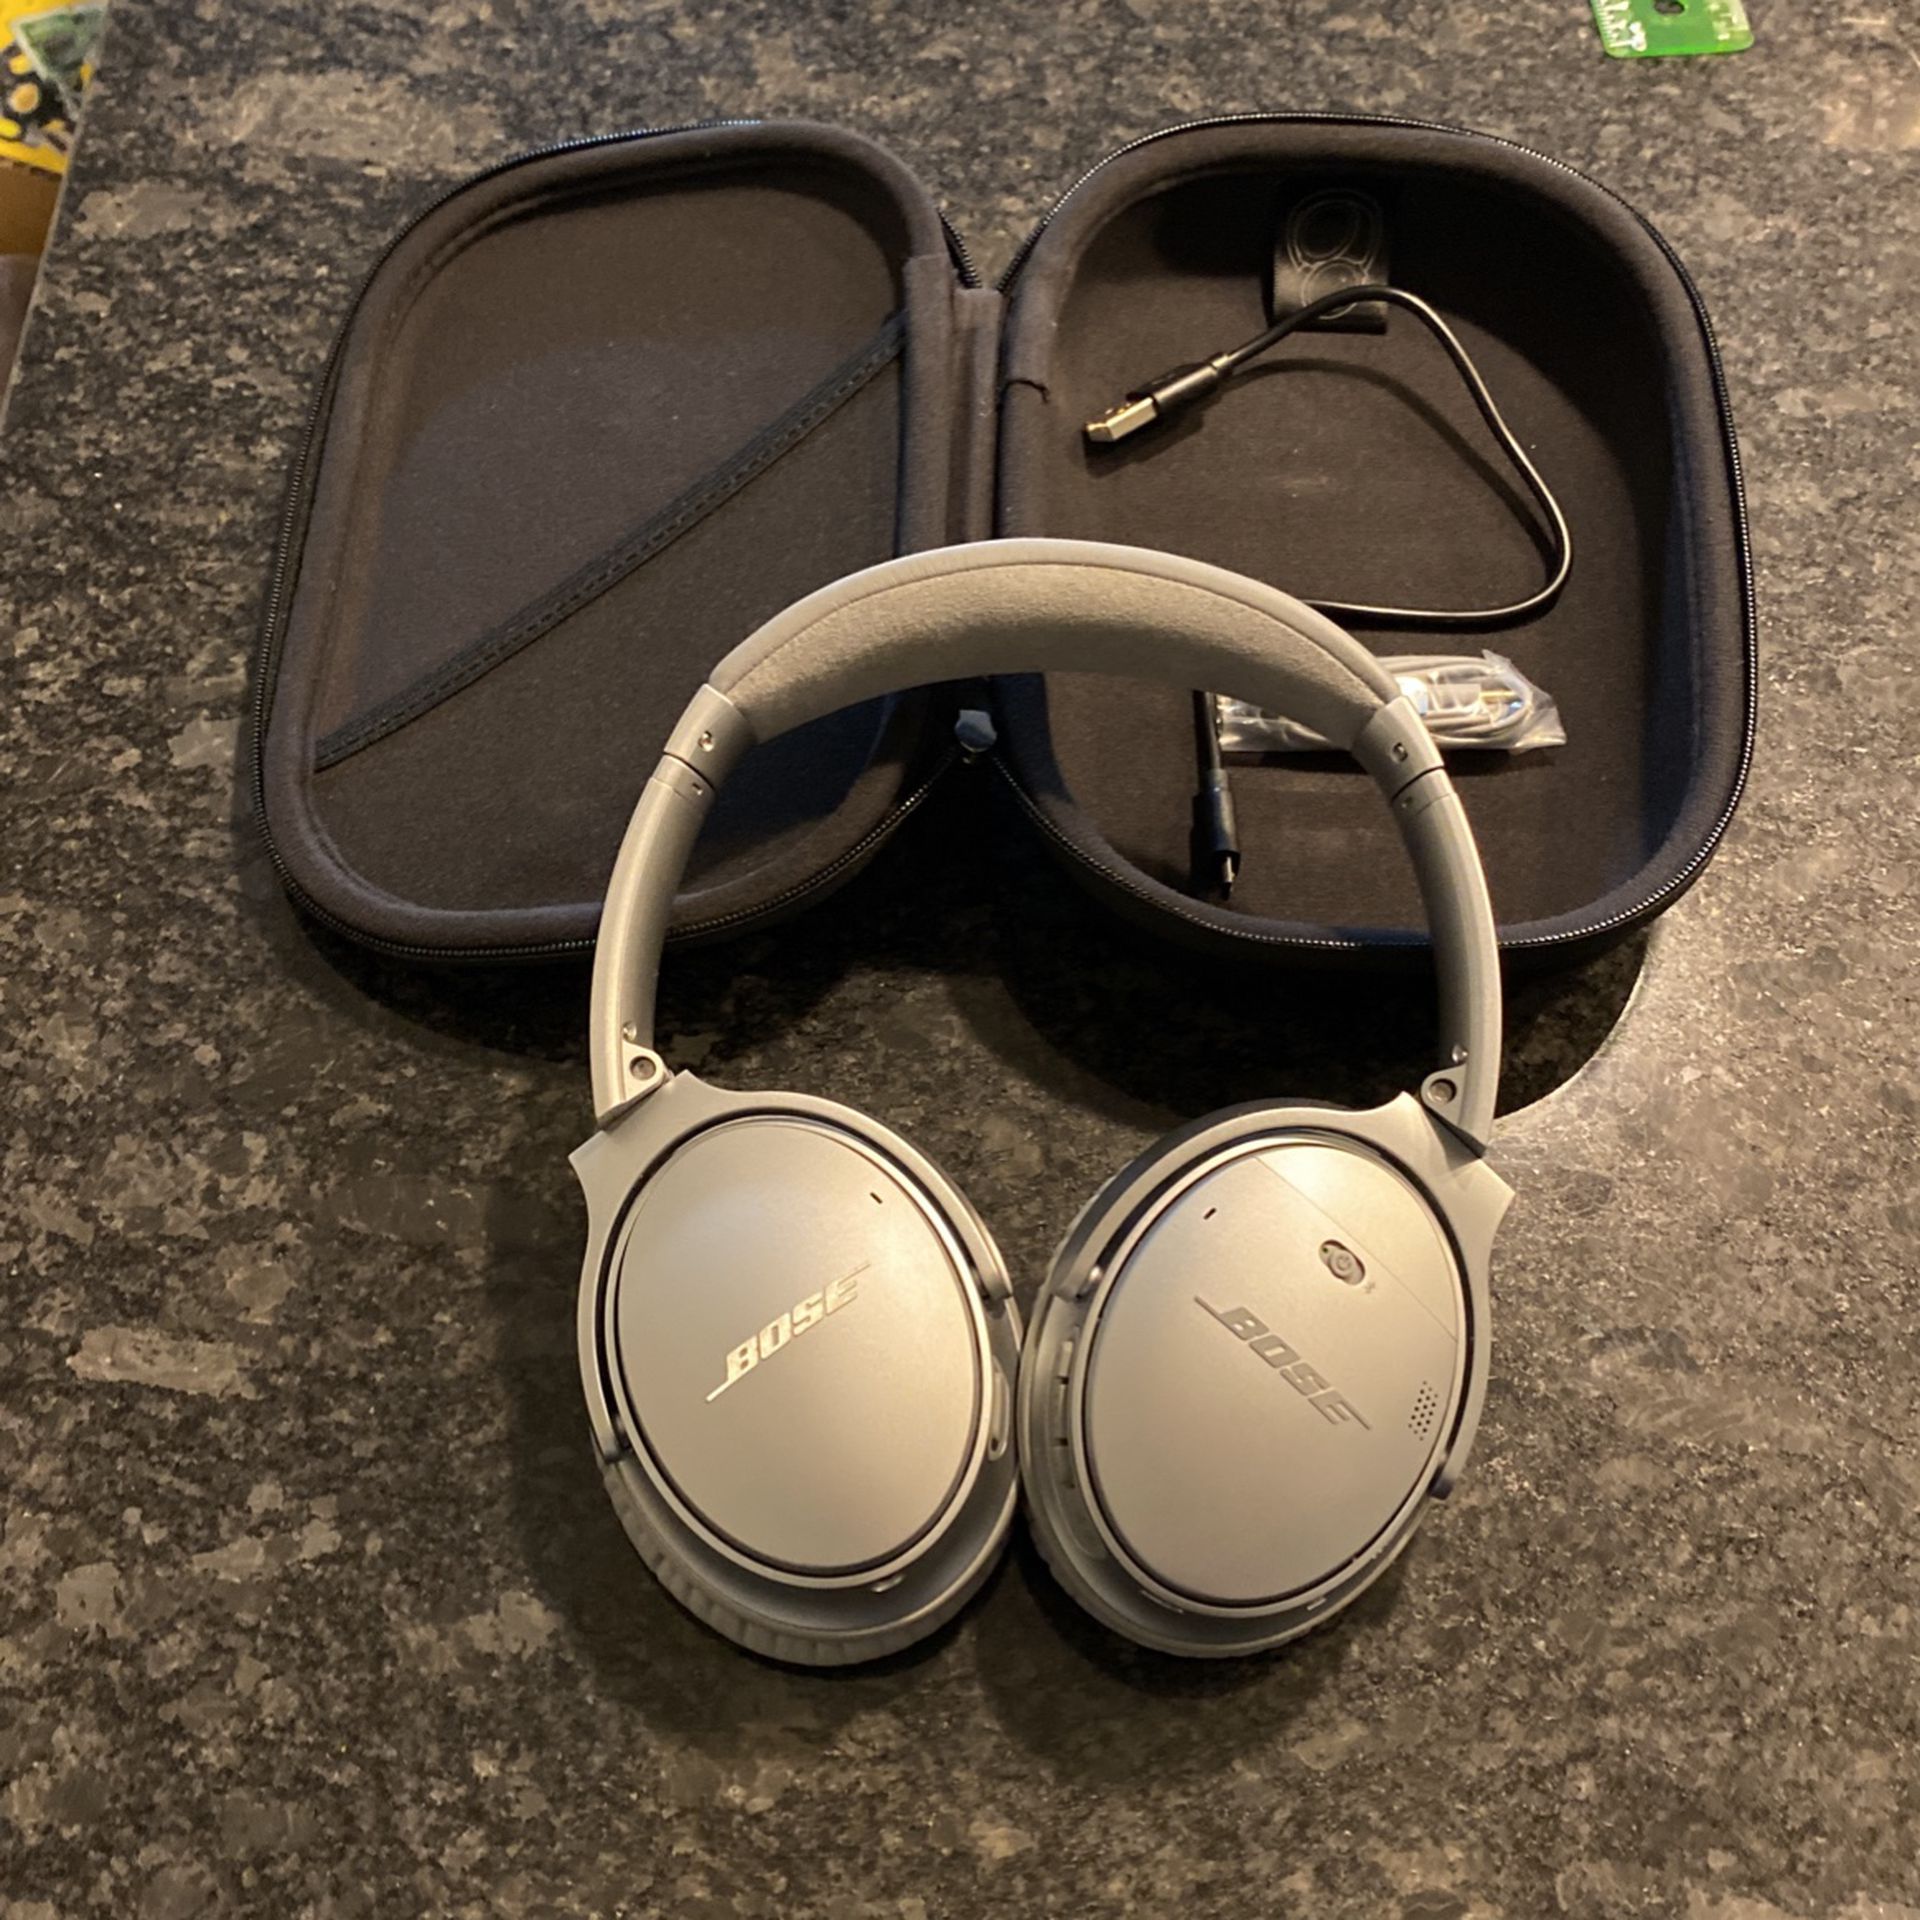 Bose Wireless Noise Cancelling Headphones With Brand new Replacement Ear pads And Headpad.